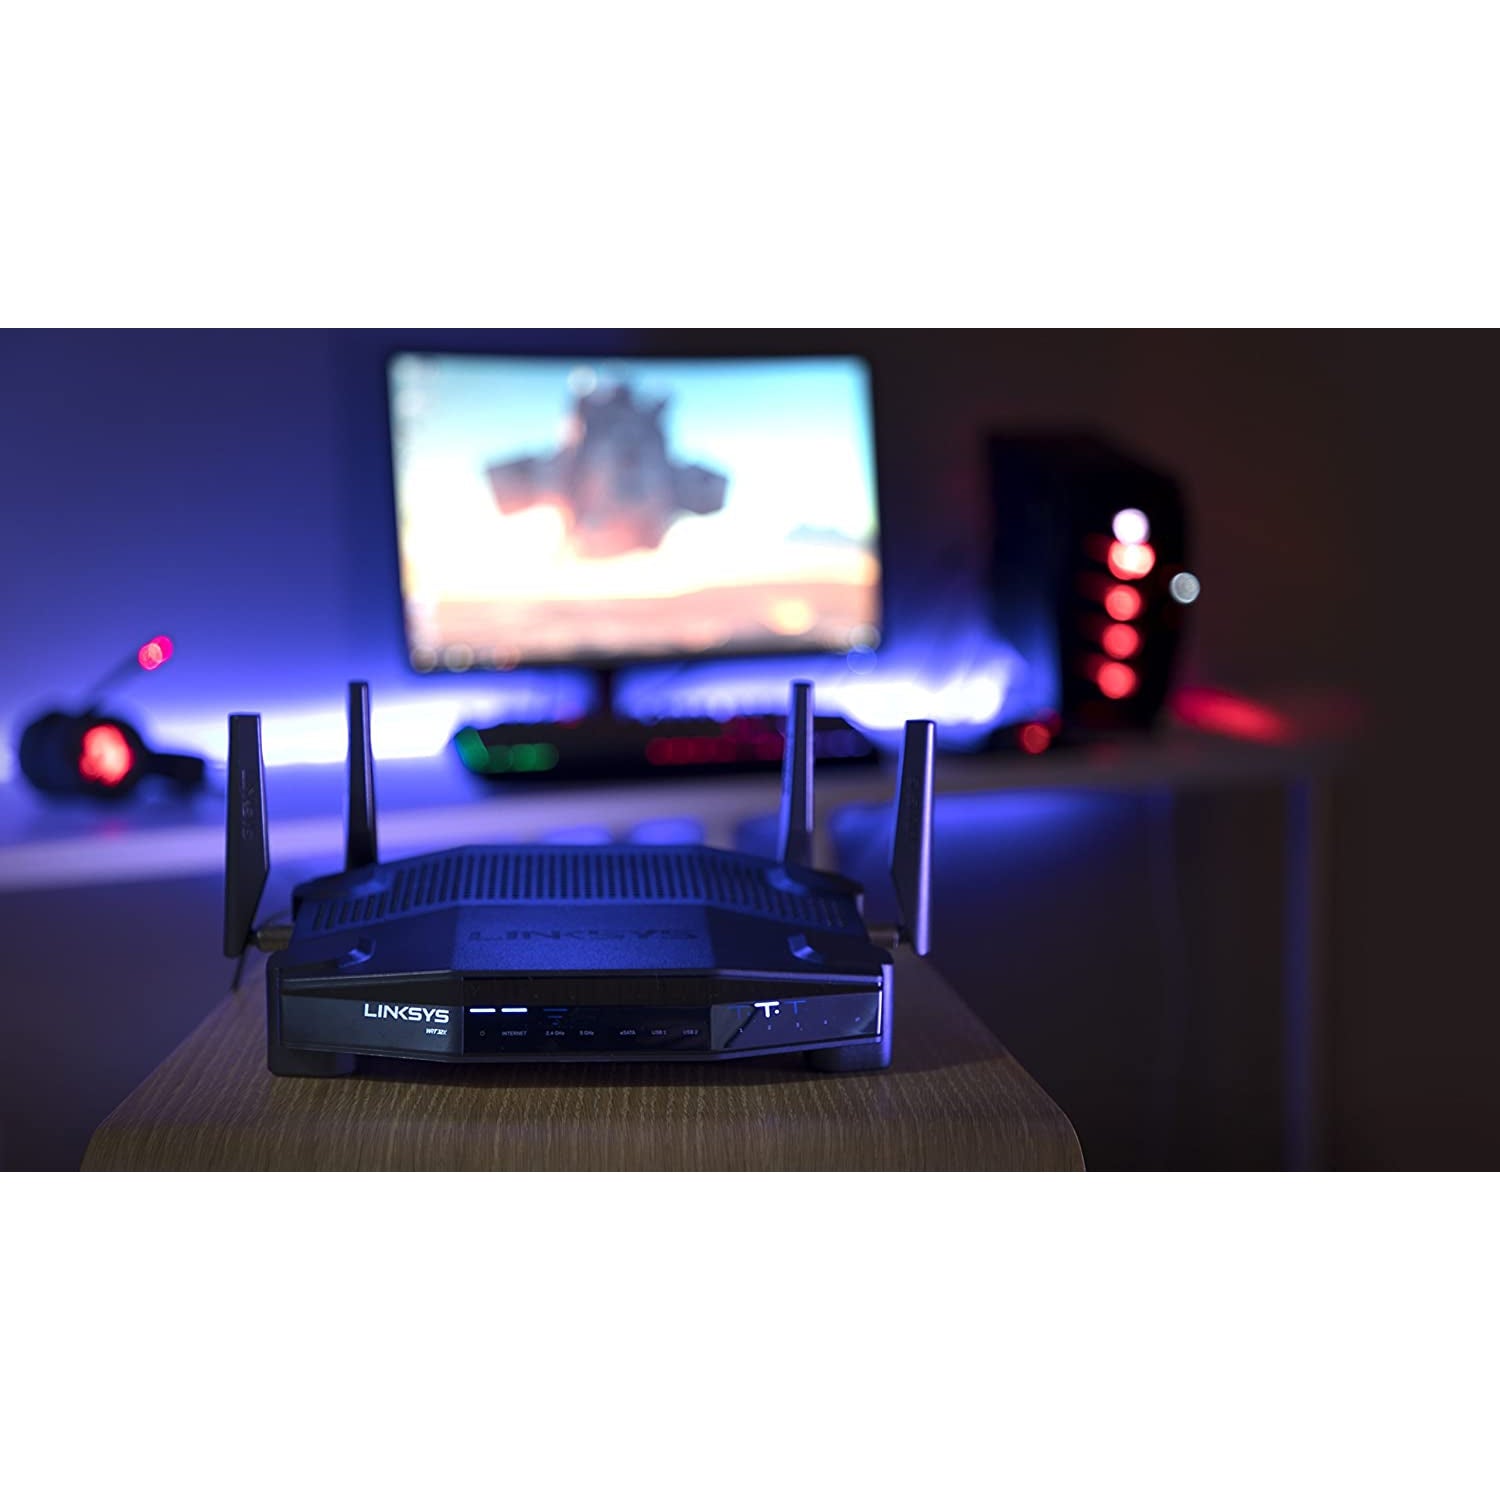 Linksys WRT32X-UK AC3200 Dual-Band Wi-Fi Gaming Router with Killer Prioritisation Engine